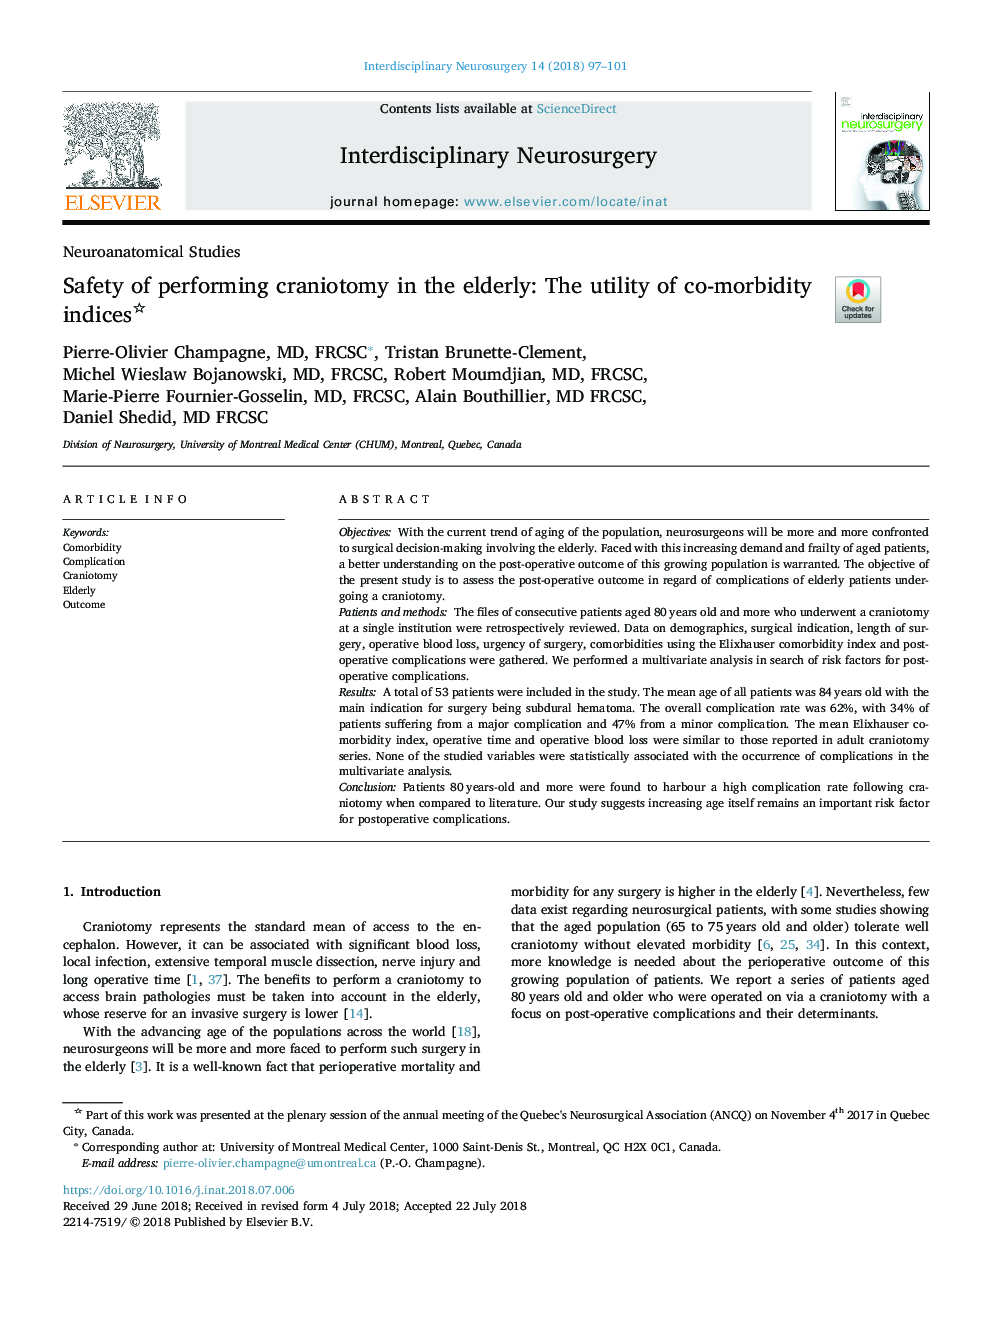 Safety of performing craniotomy in the elderly: The utility of co-morbidity indices